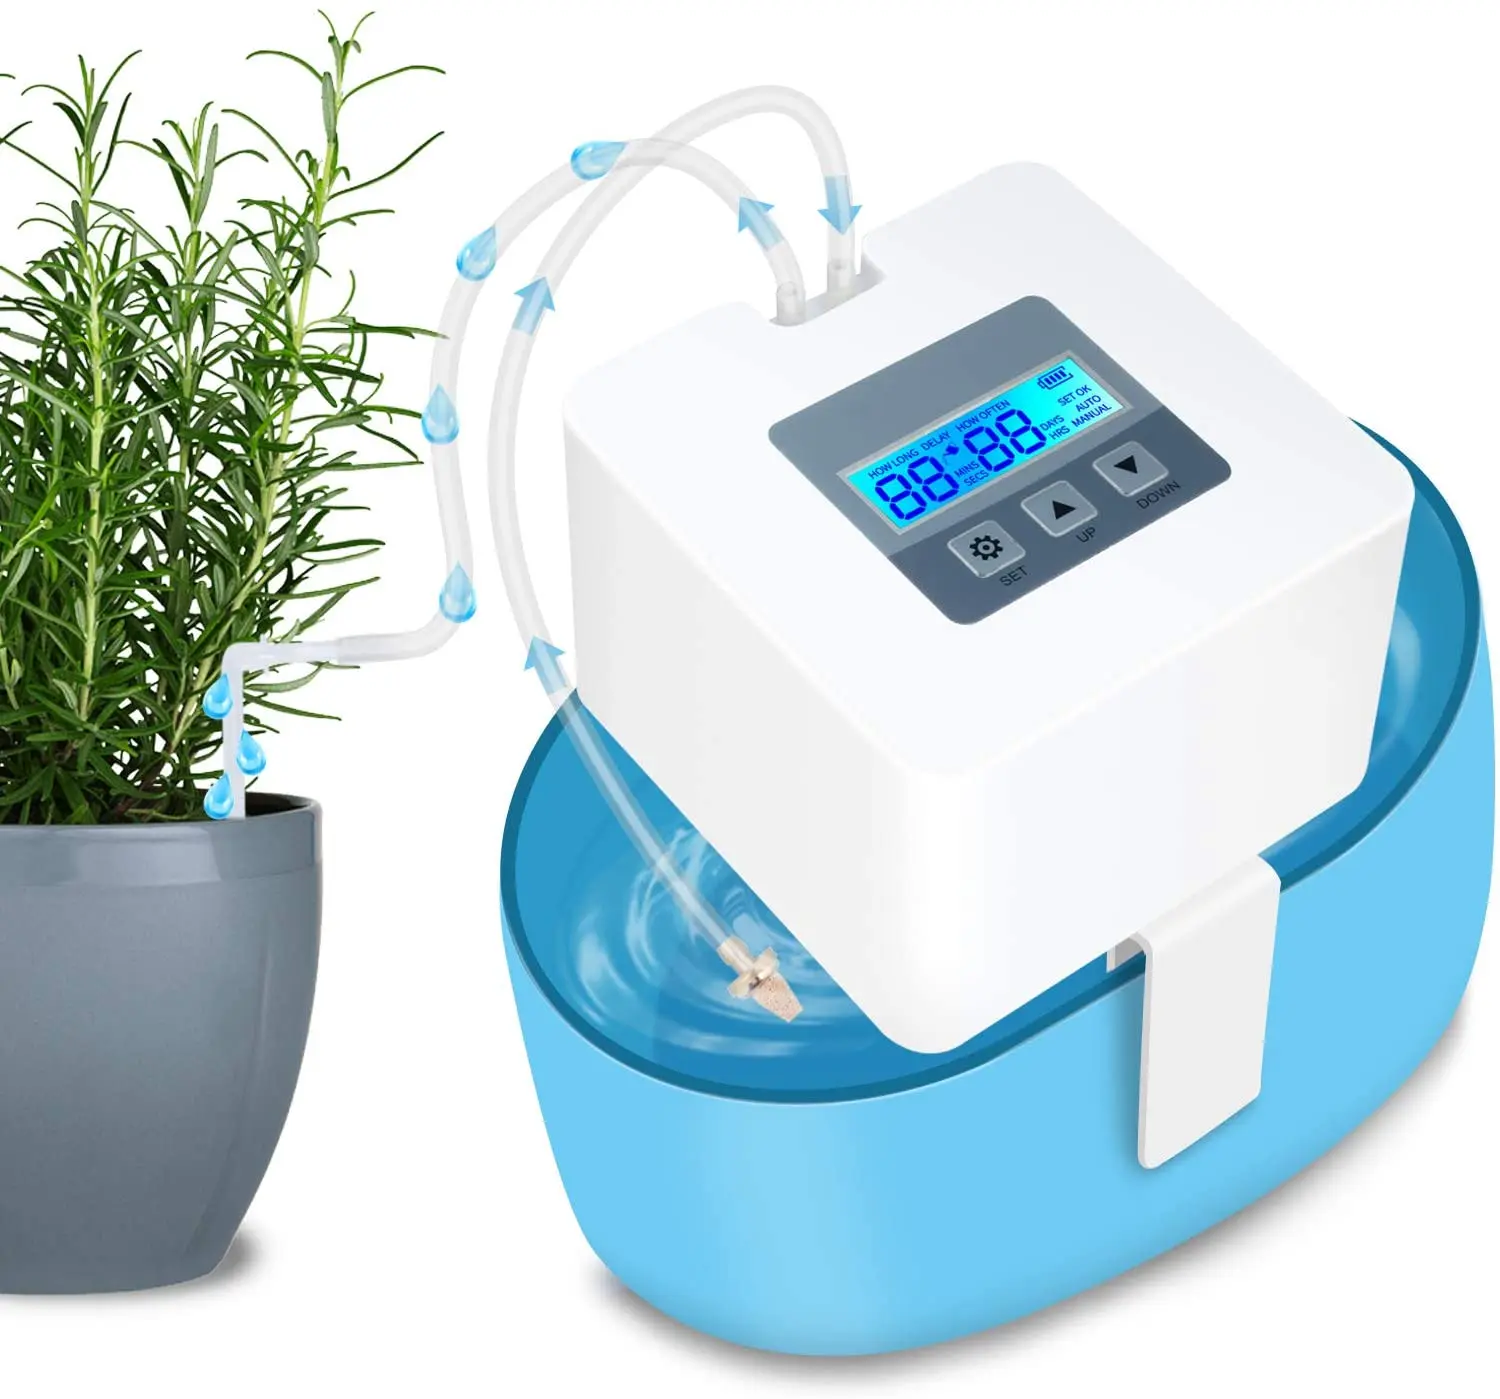 Self Watering System with Timer and USB Power Operation System Auto & Manual Mode Digital Programmable Water Timer for Indoor Garden Potted Plants White Auto DIY Micro Automatic Drip Irrigation Kit 